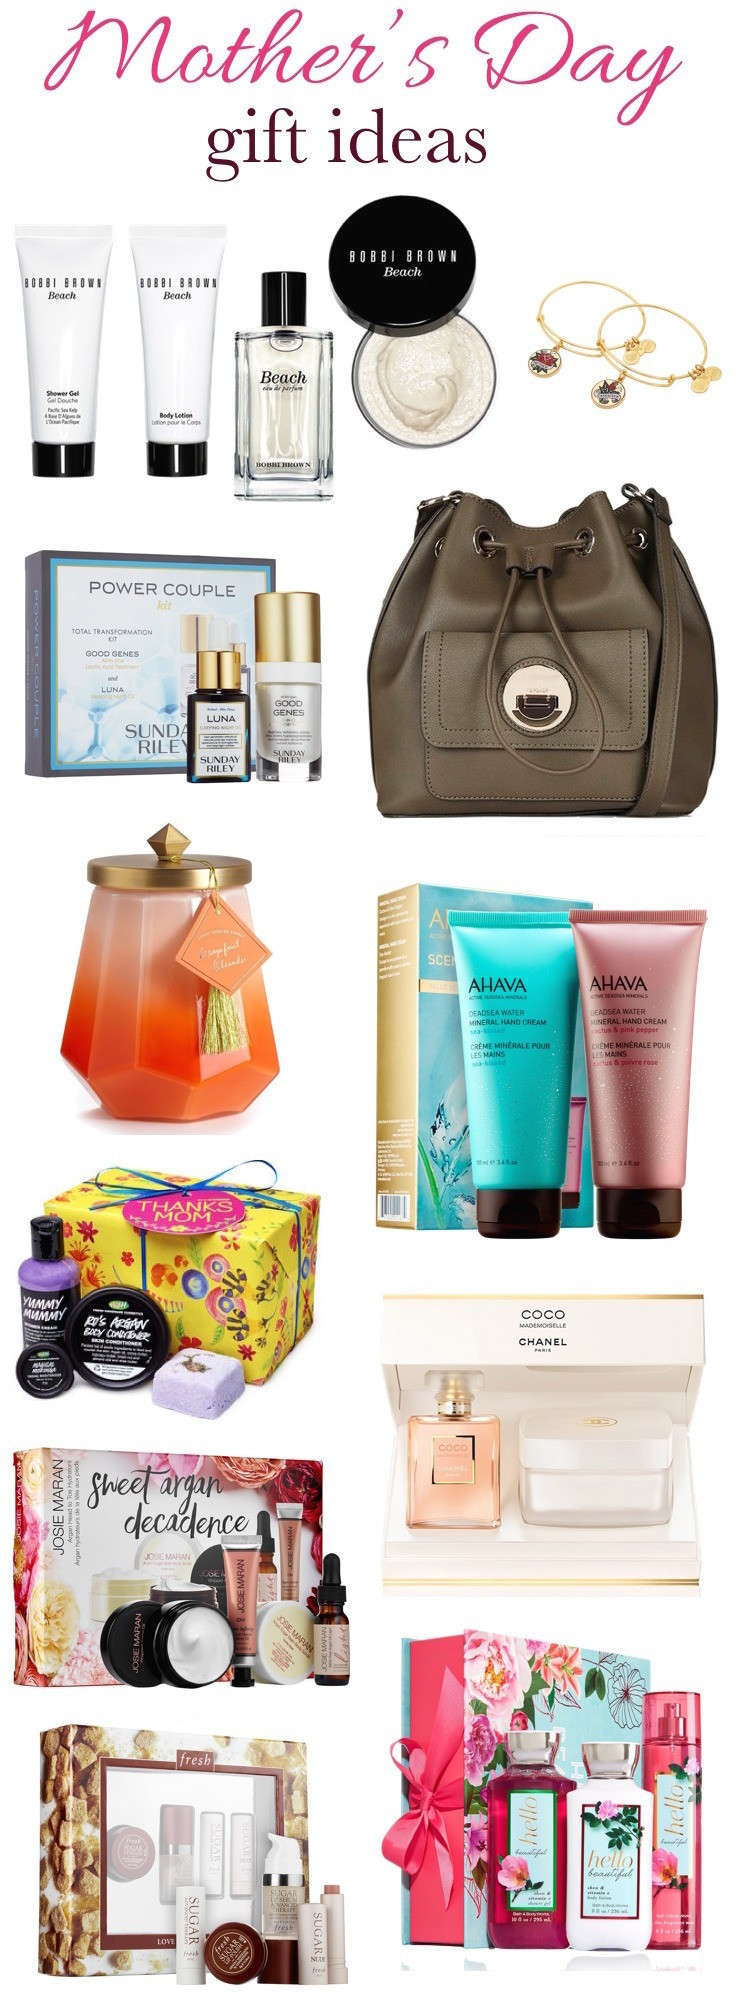 Father'S Day Gift Ideas From Wife
 Mother s Day Gifts That Primp & Pamper Under $100